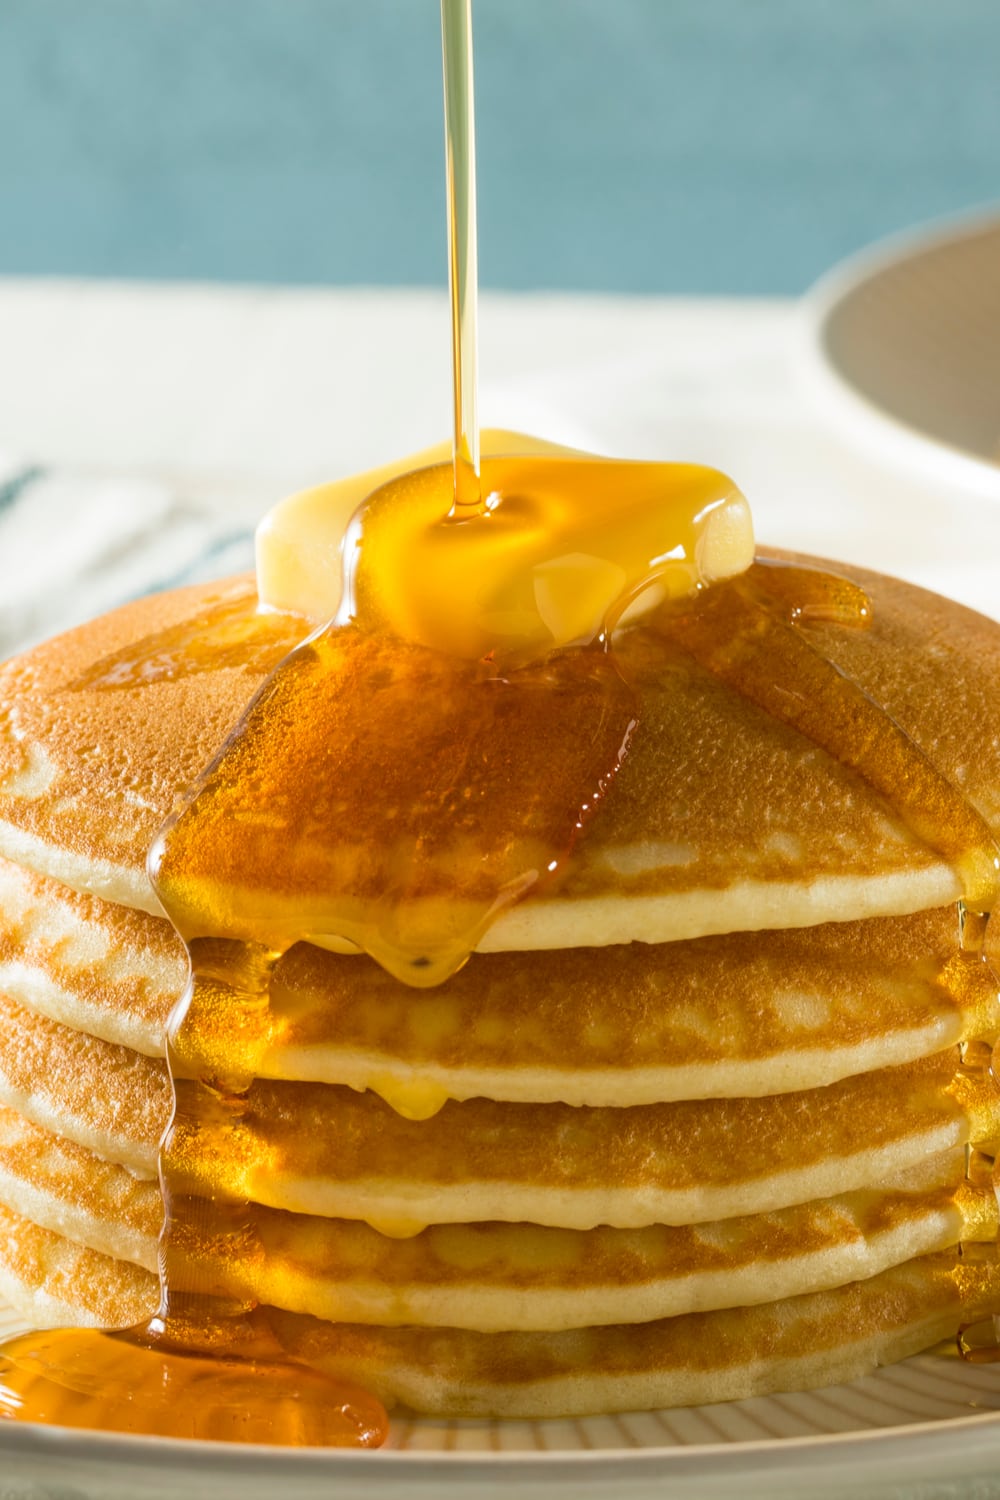 Jiffy Cornbread Pancakes Drizzled With Syrup and Butter on Top